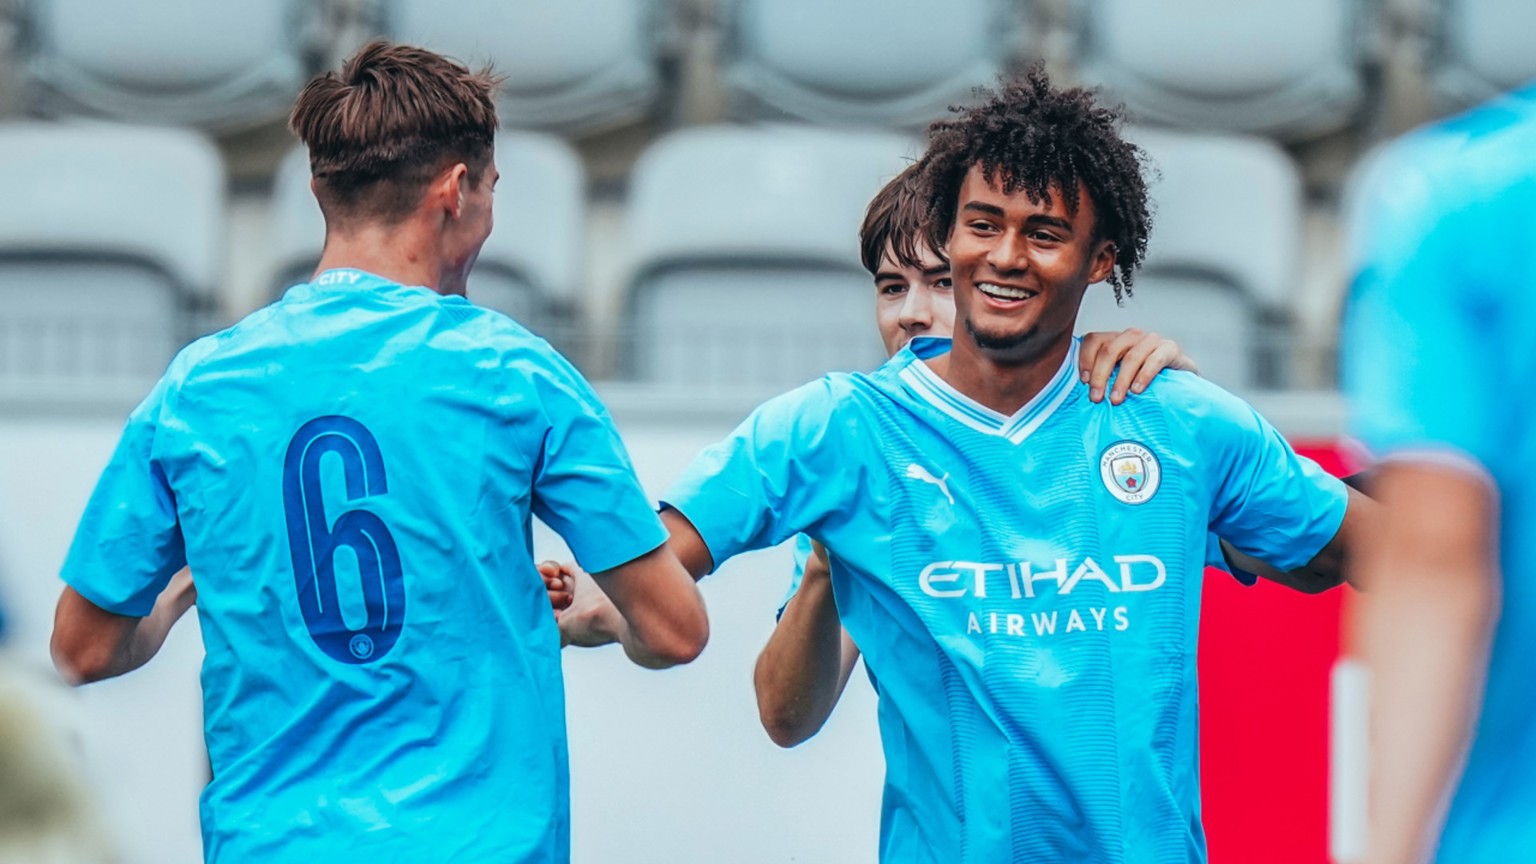 City’s Under-19s impress in clinical Young Boys win 